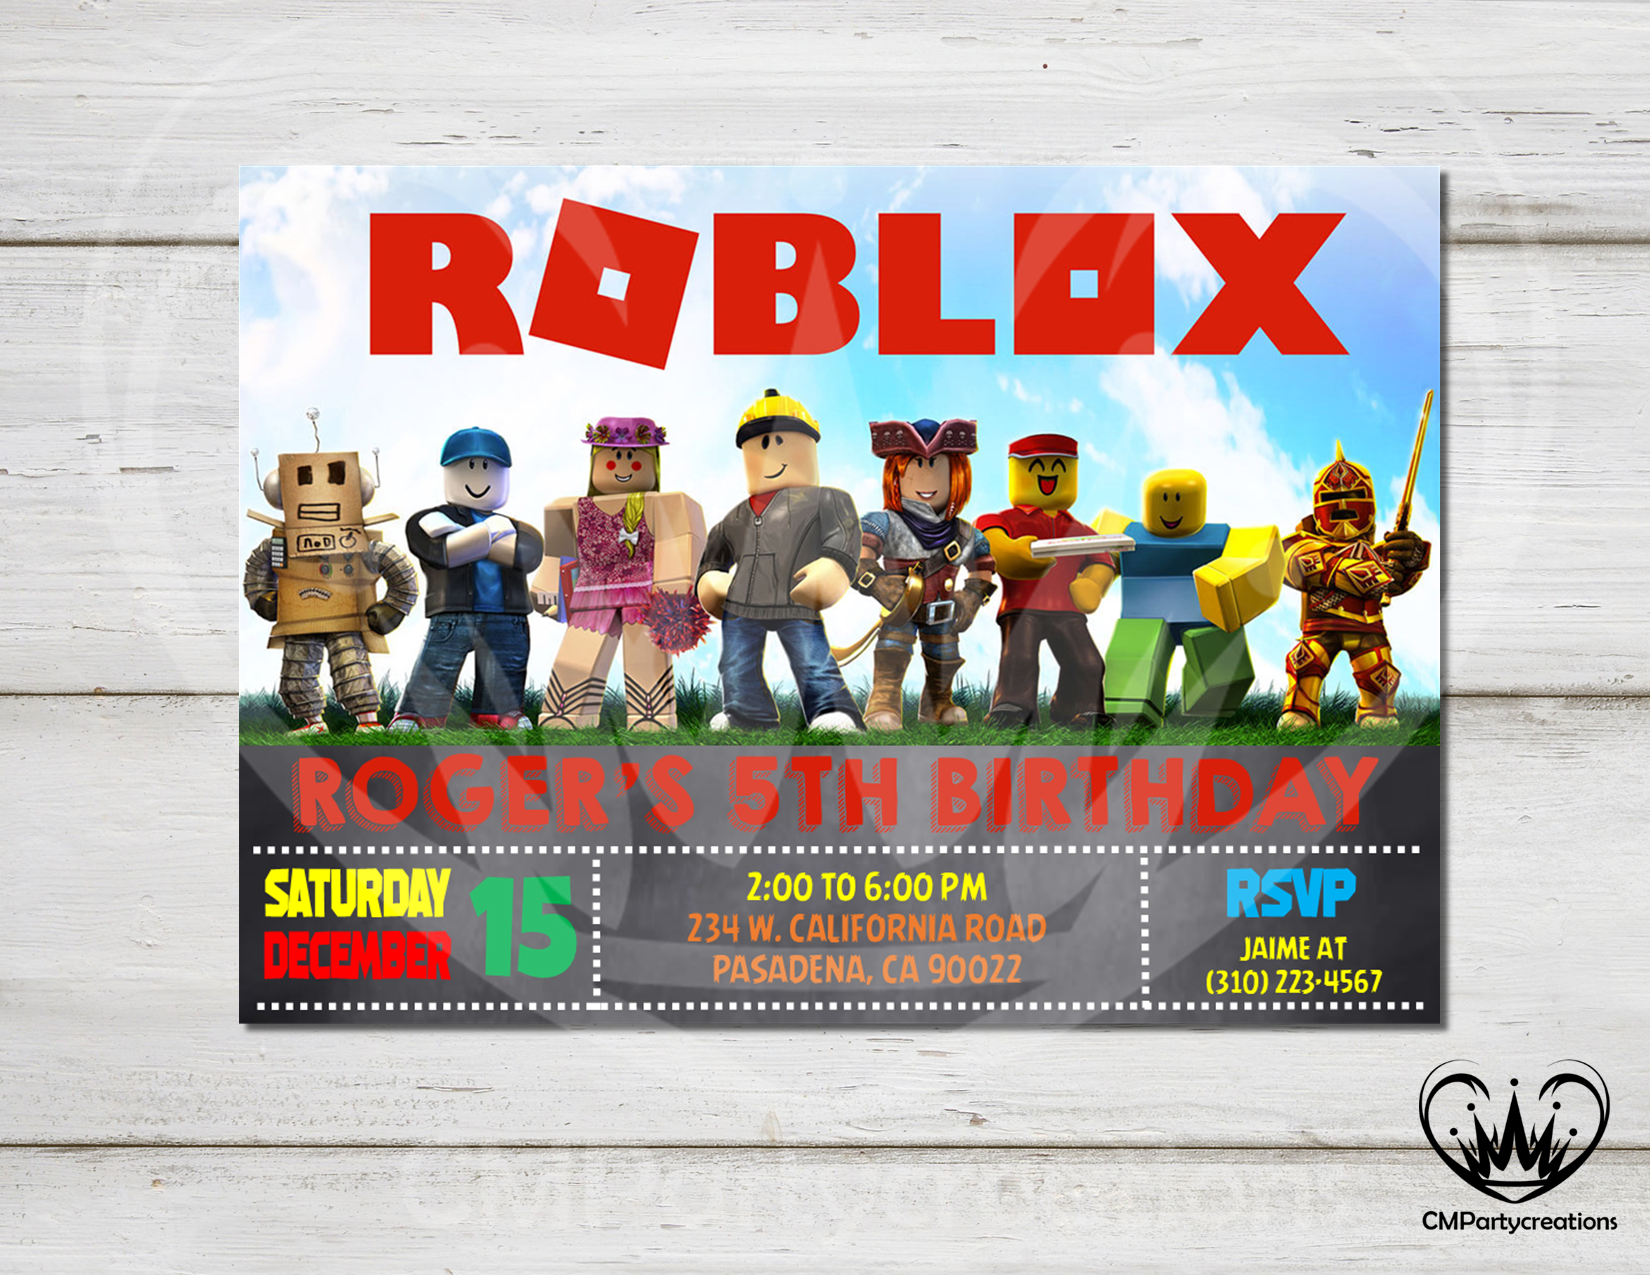 Roblox Group Invitation Birthday Party Cmpartycreations - how to invite someone in roblox